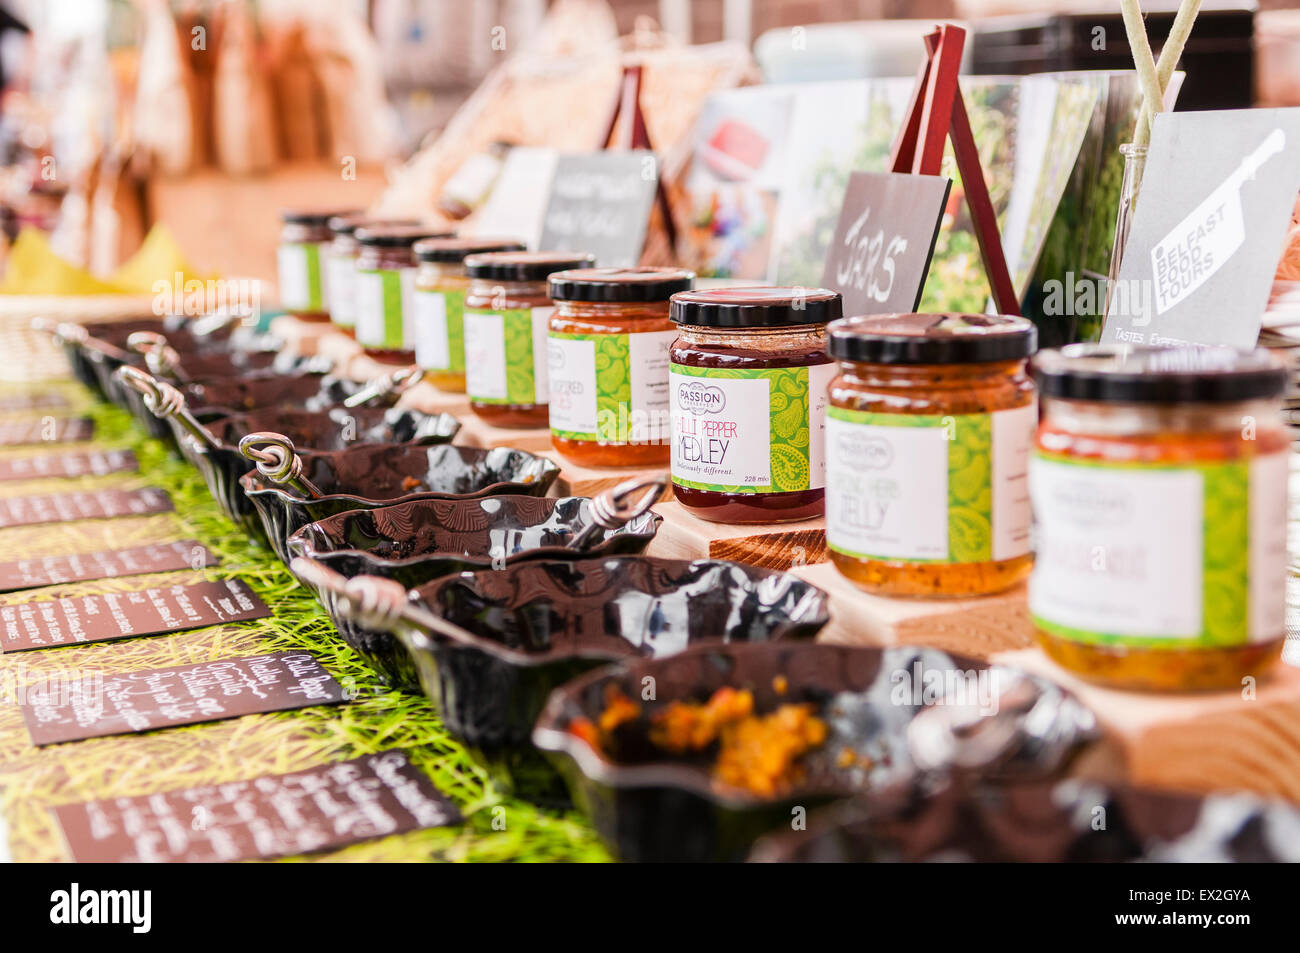 A row of jams, chutneys and pastes on sale at a market stall, with bowls for samples. Stock Photo